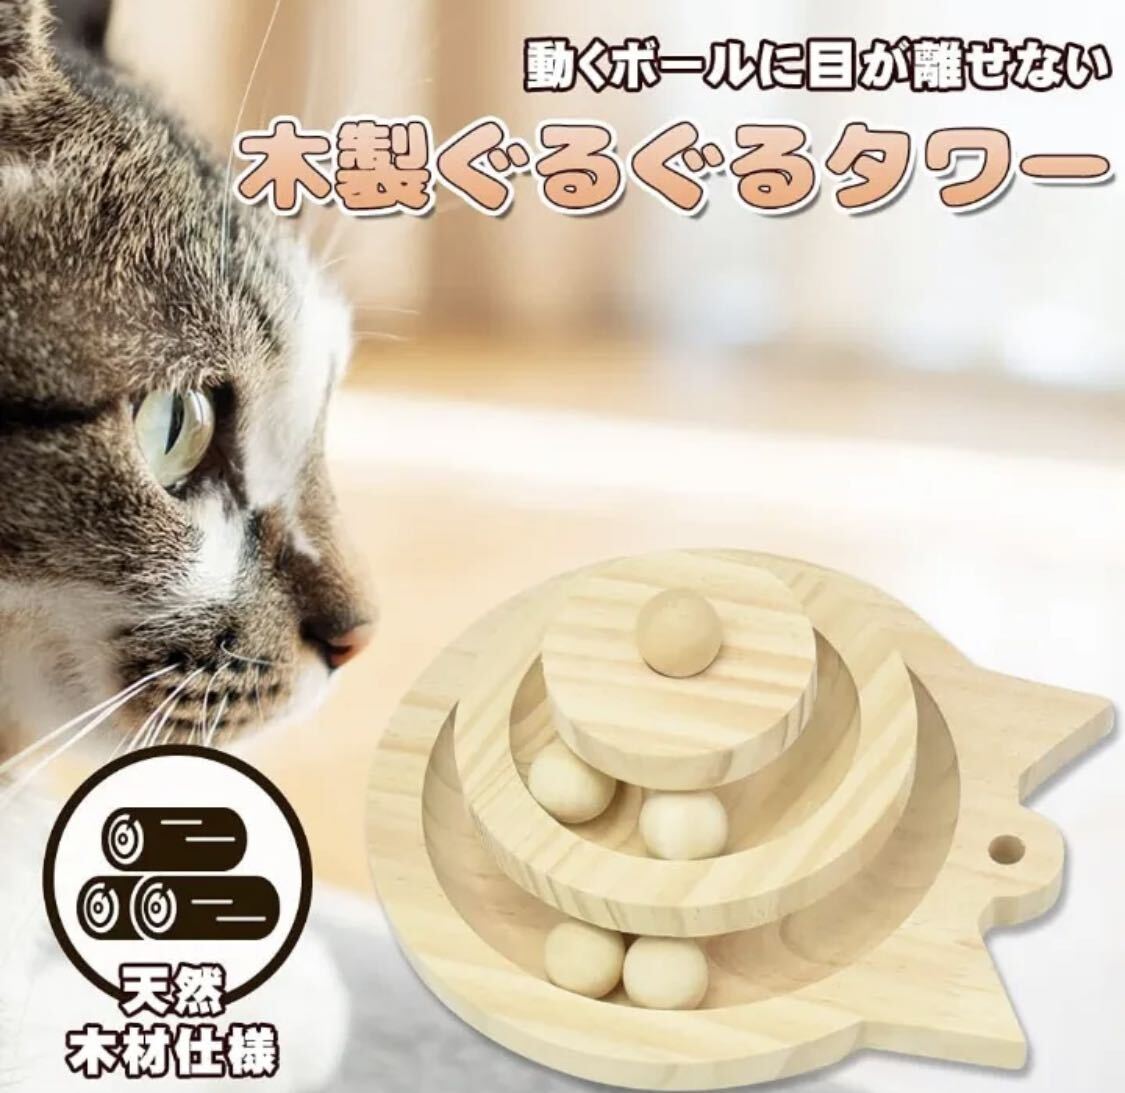  cat wooden toy rotation ball pet accessories -stroke less cancellation motion shortage 